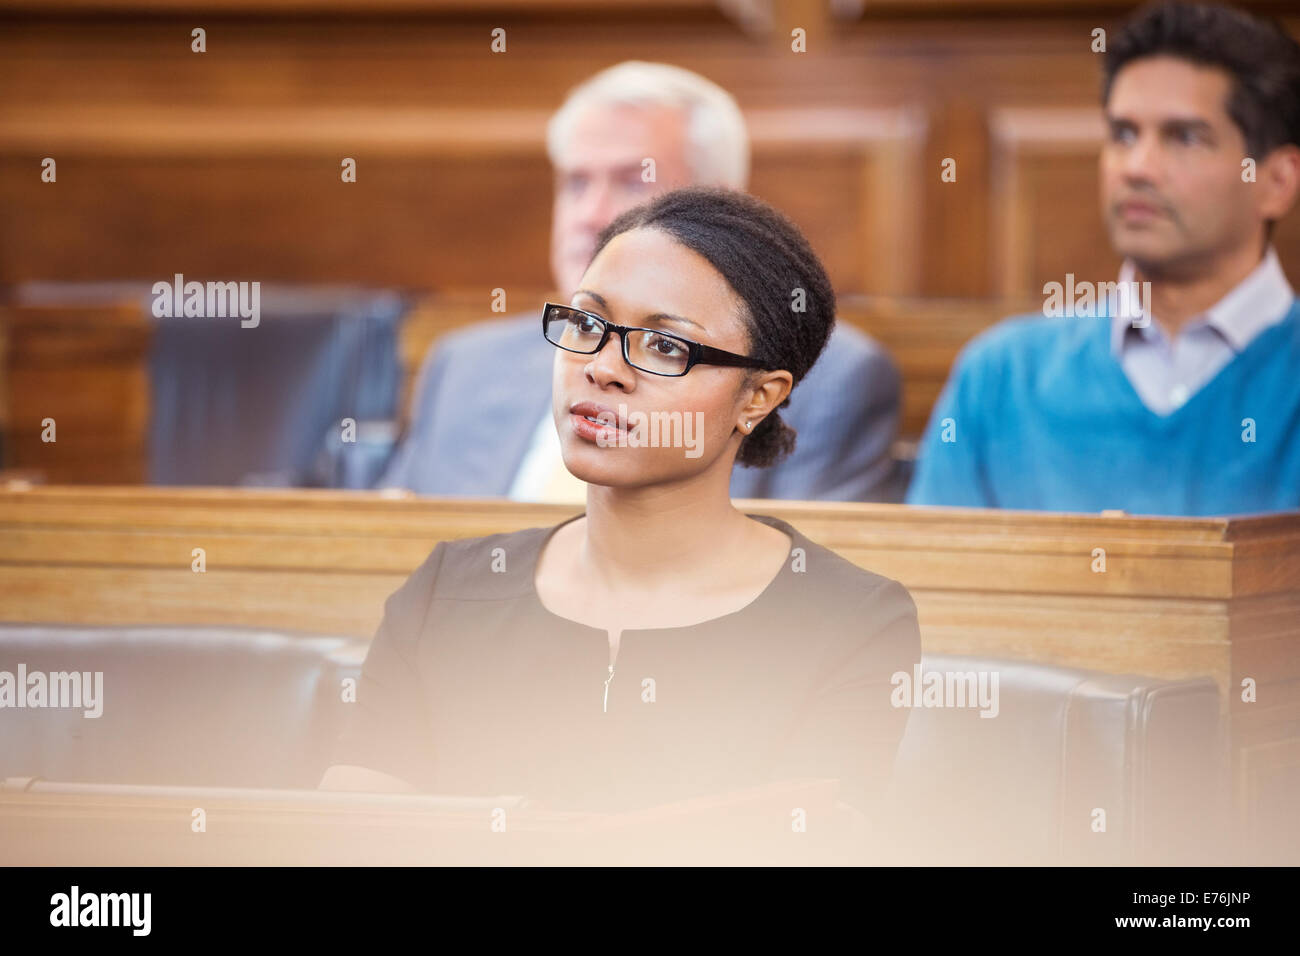 Woman observing trial Stock Photo